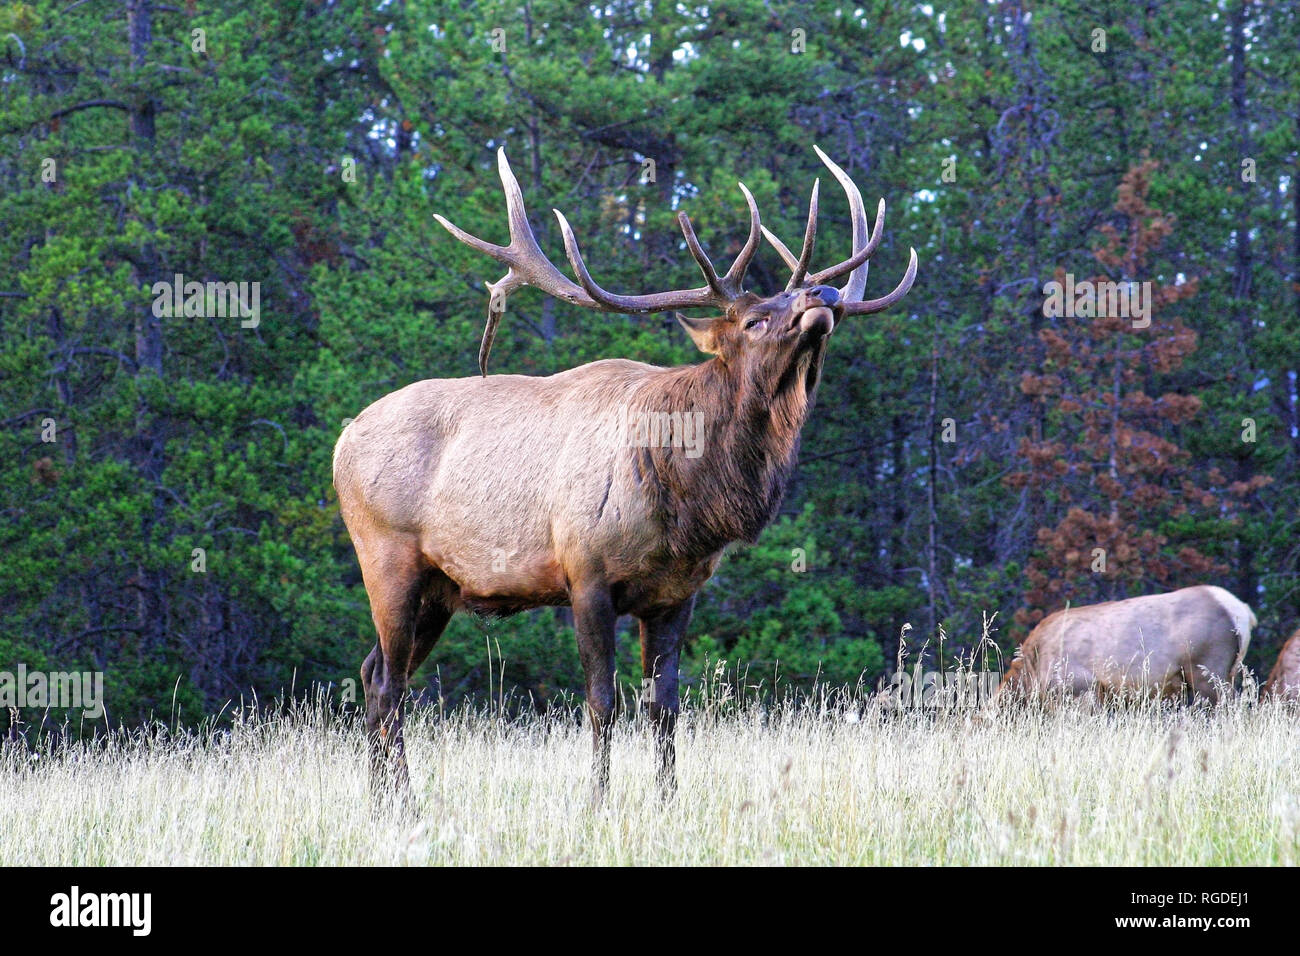 38,618.01057 experienced huge old elk bull (Cervus canadensis) in rut posture ready & willing to fight to protect his herd from adult male intruders Stock Photo